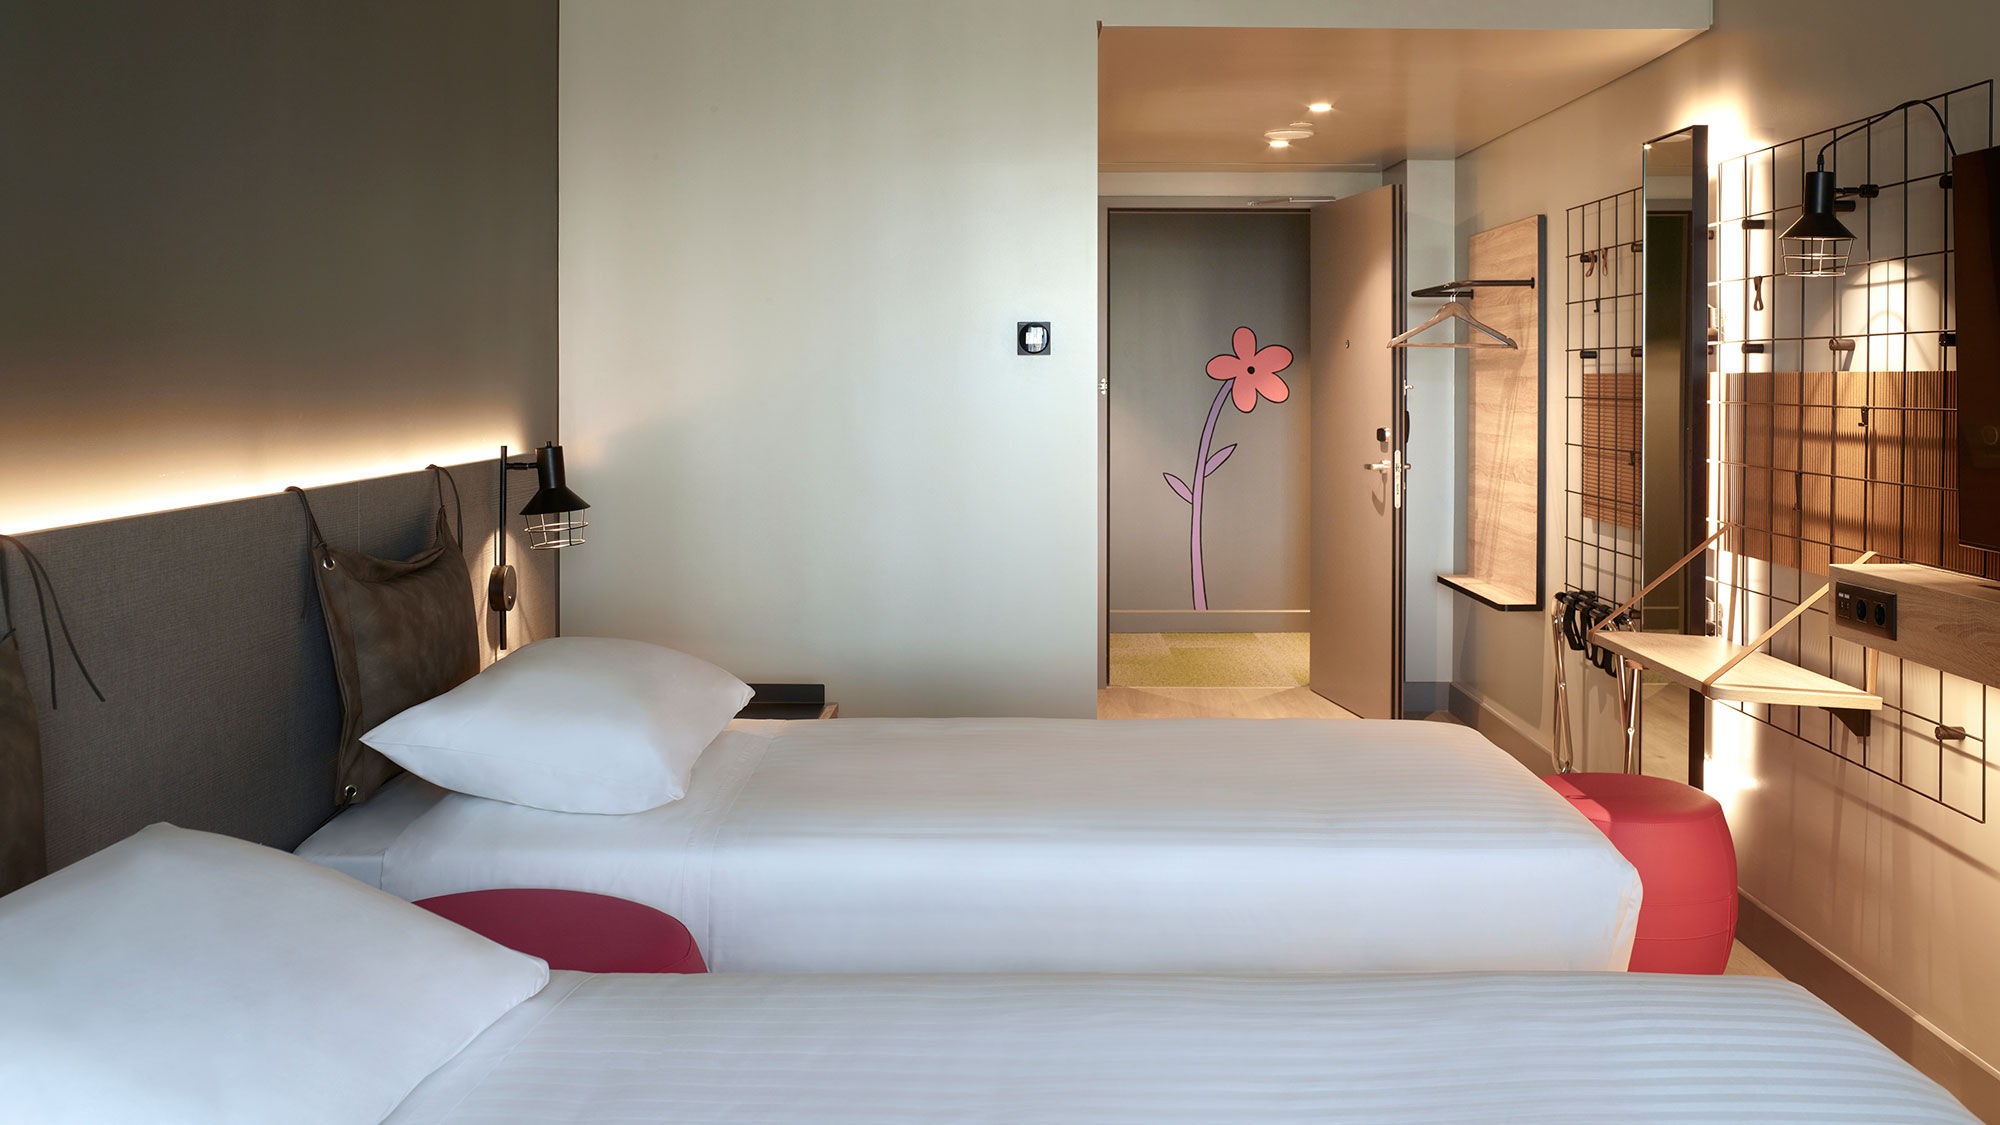 A guestroom at the Moxy Athens City.